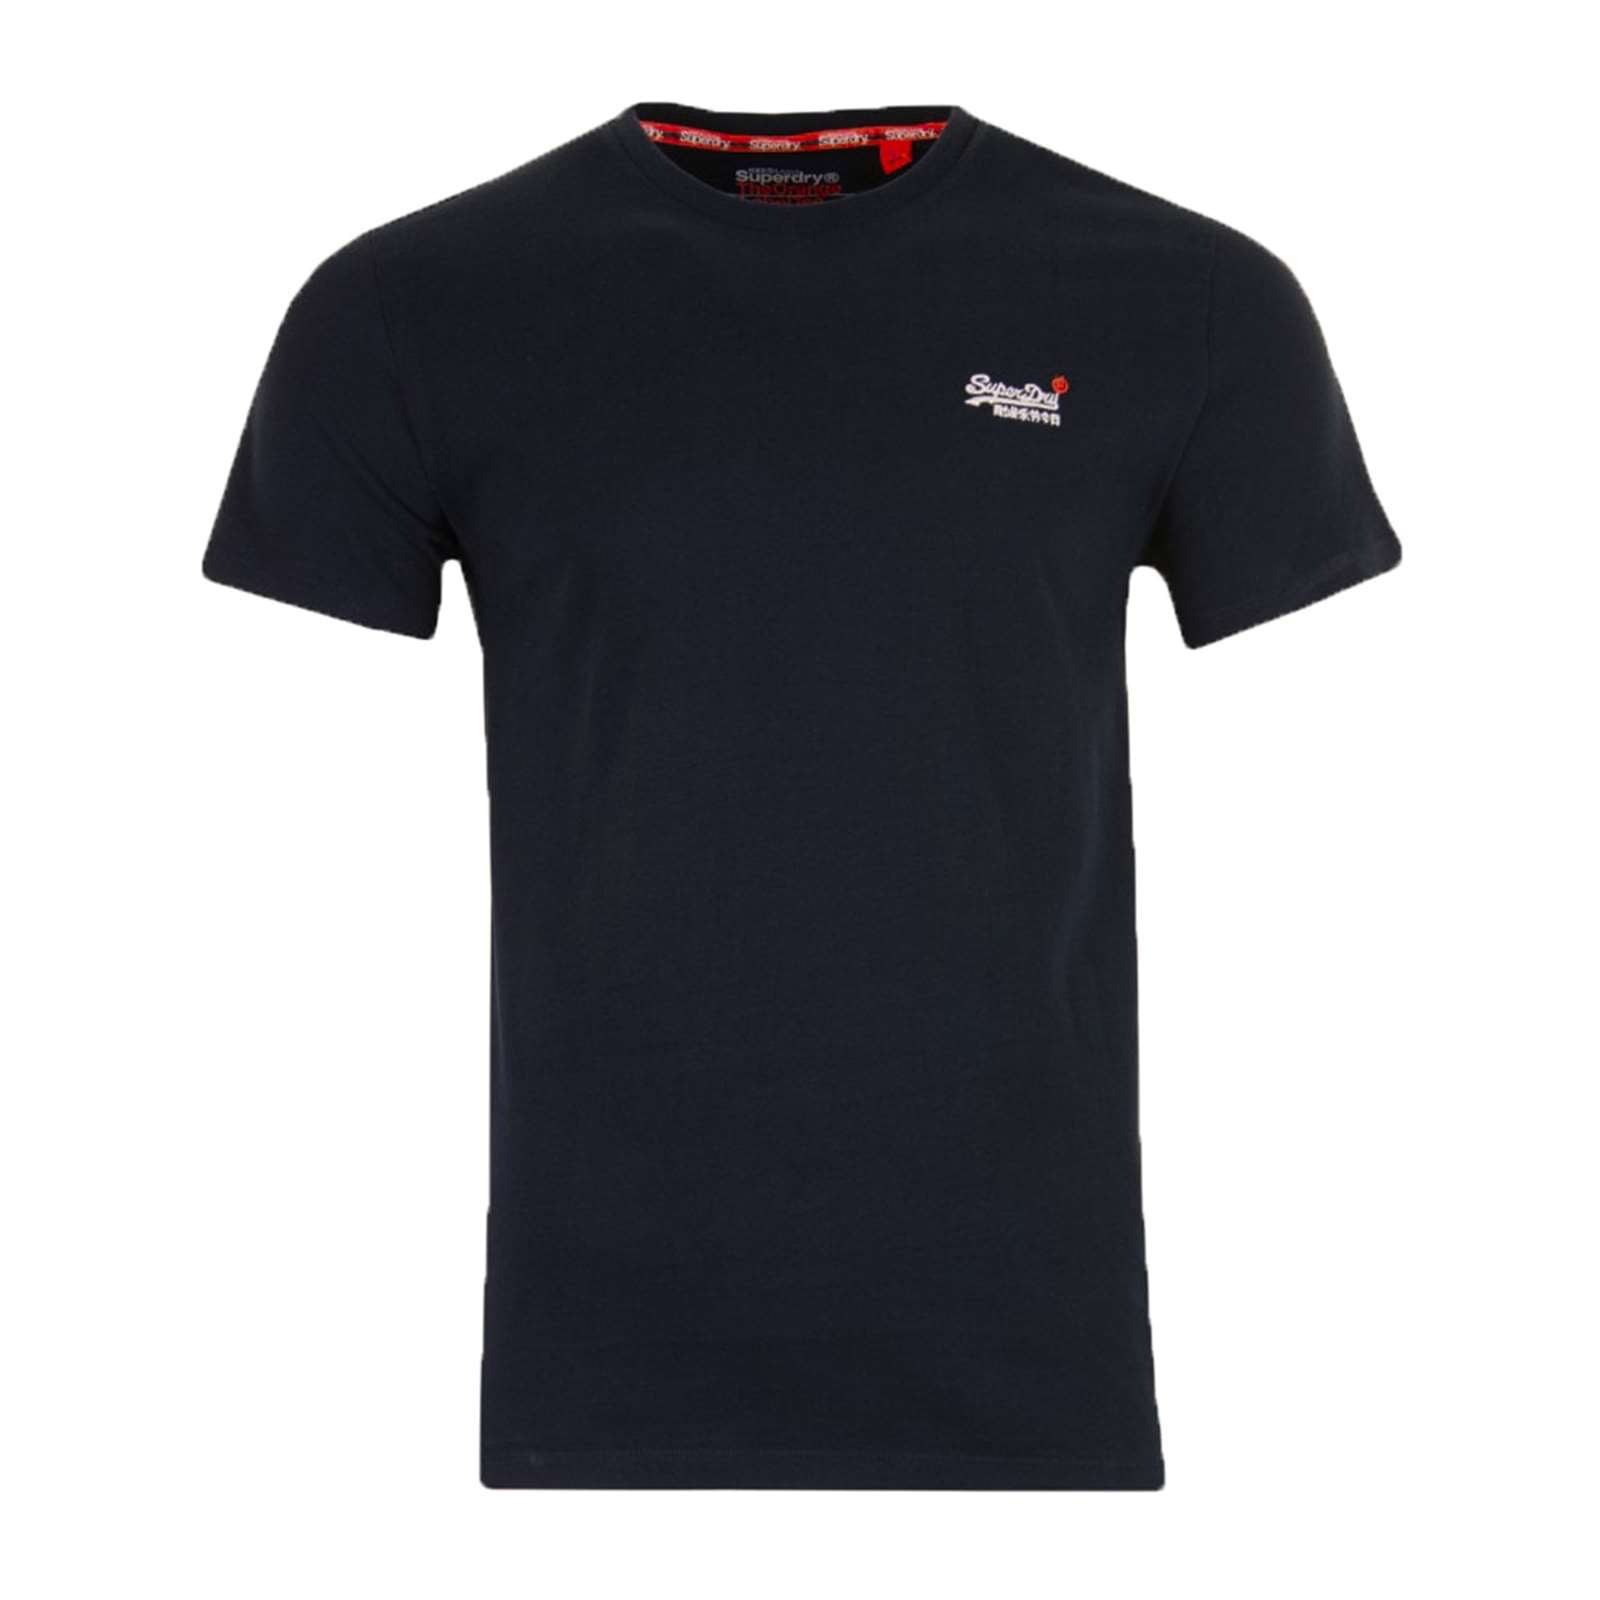 NEW Super Dry Men’s Athletic Vintage Embroidery Short Sleeve Crew Neck T-Shirt 